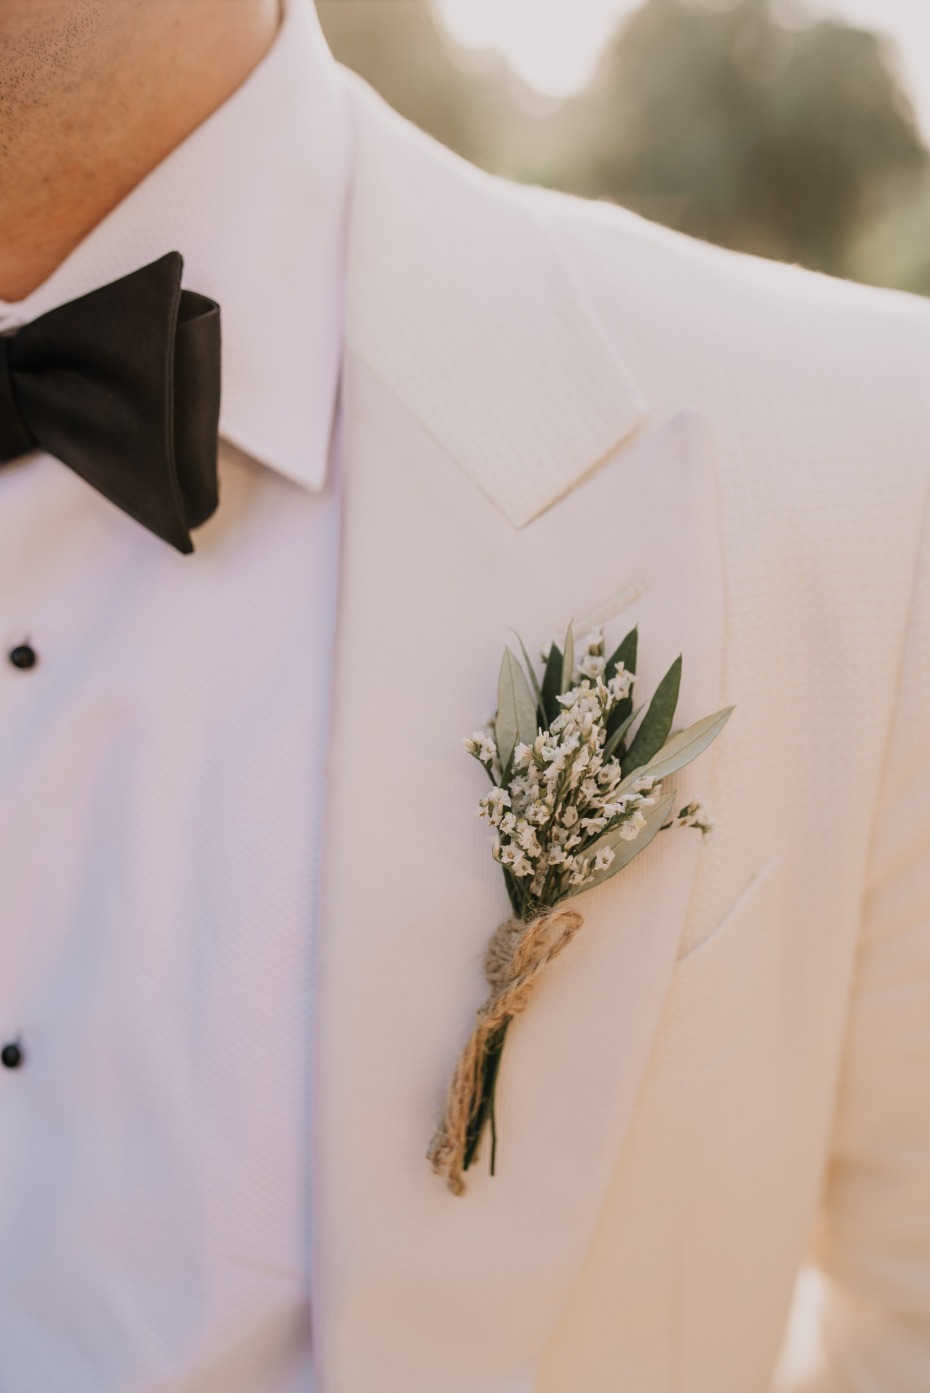 Rustic chic boutonniere